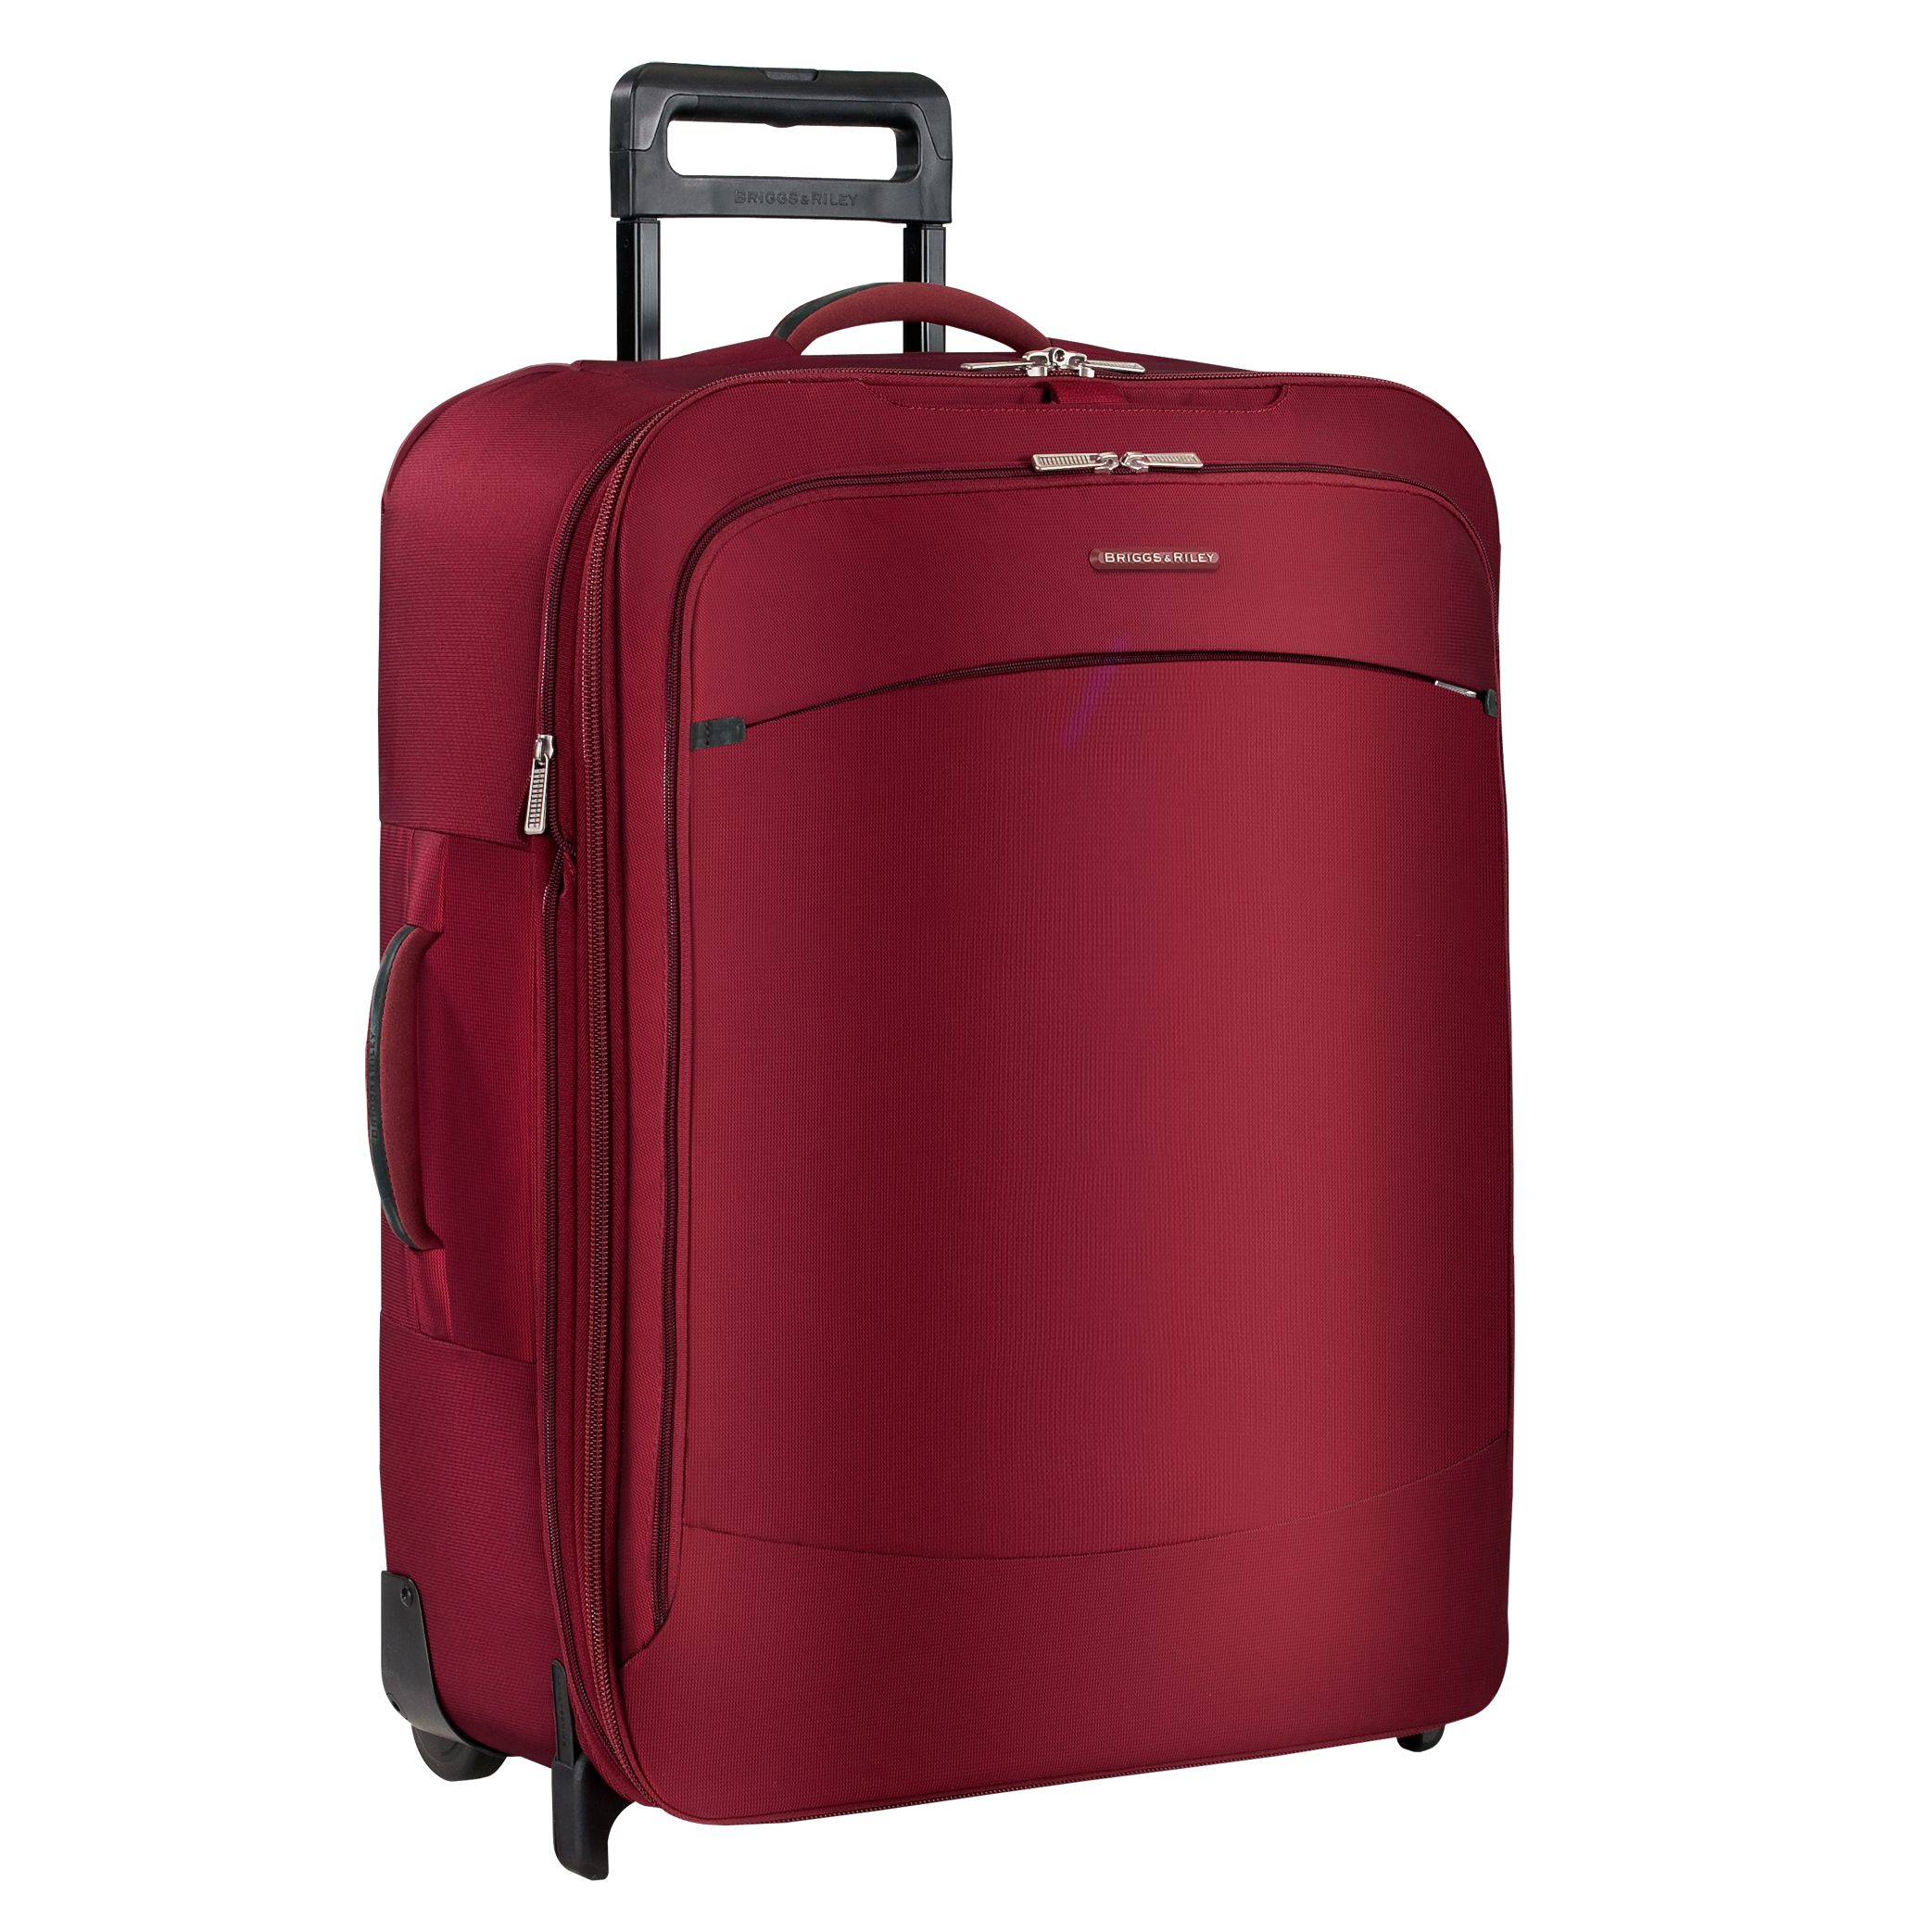 Briggs & Riley Transcend 27" Expandable Trolley Case, Sunset at John Lewis